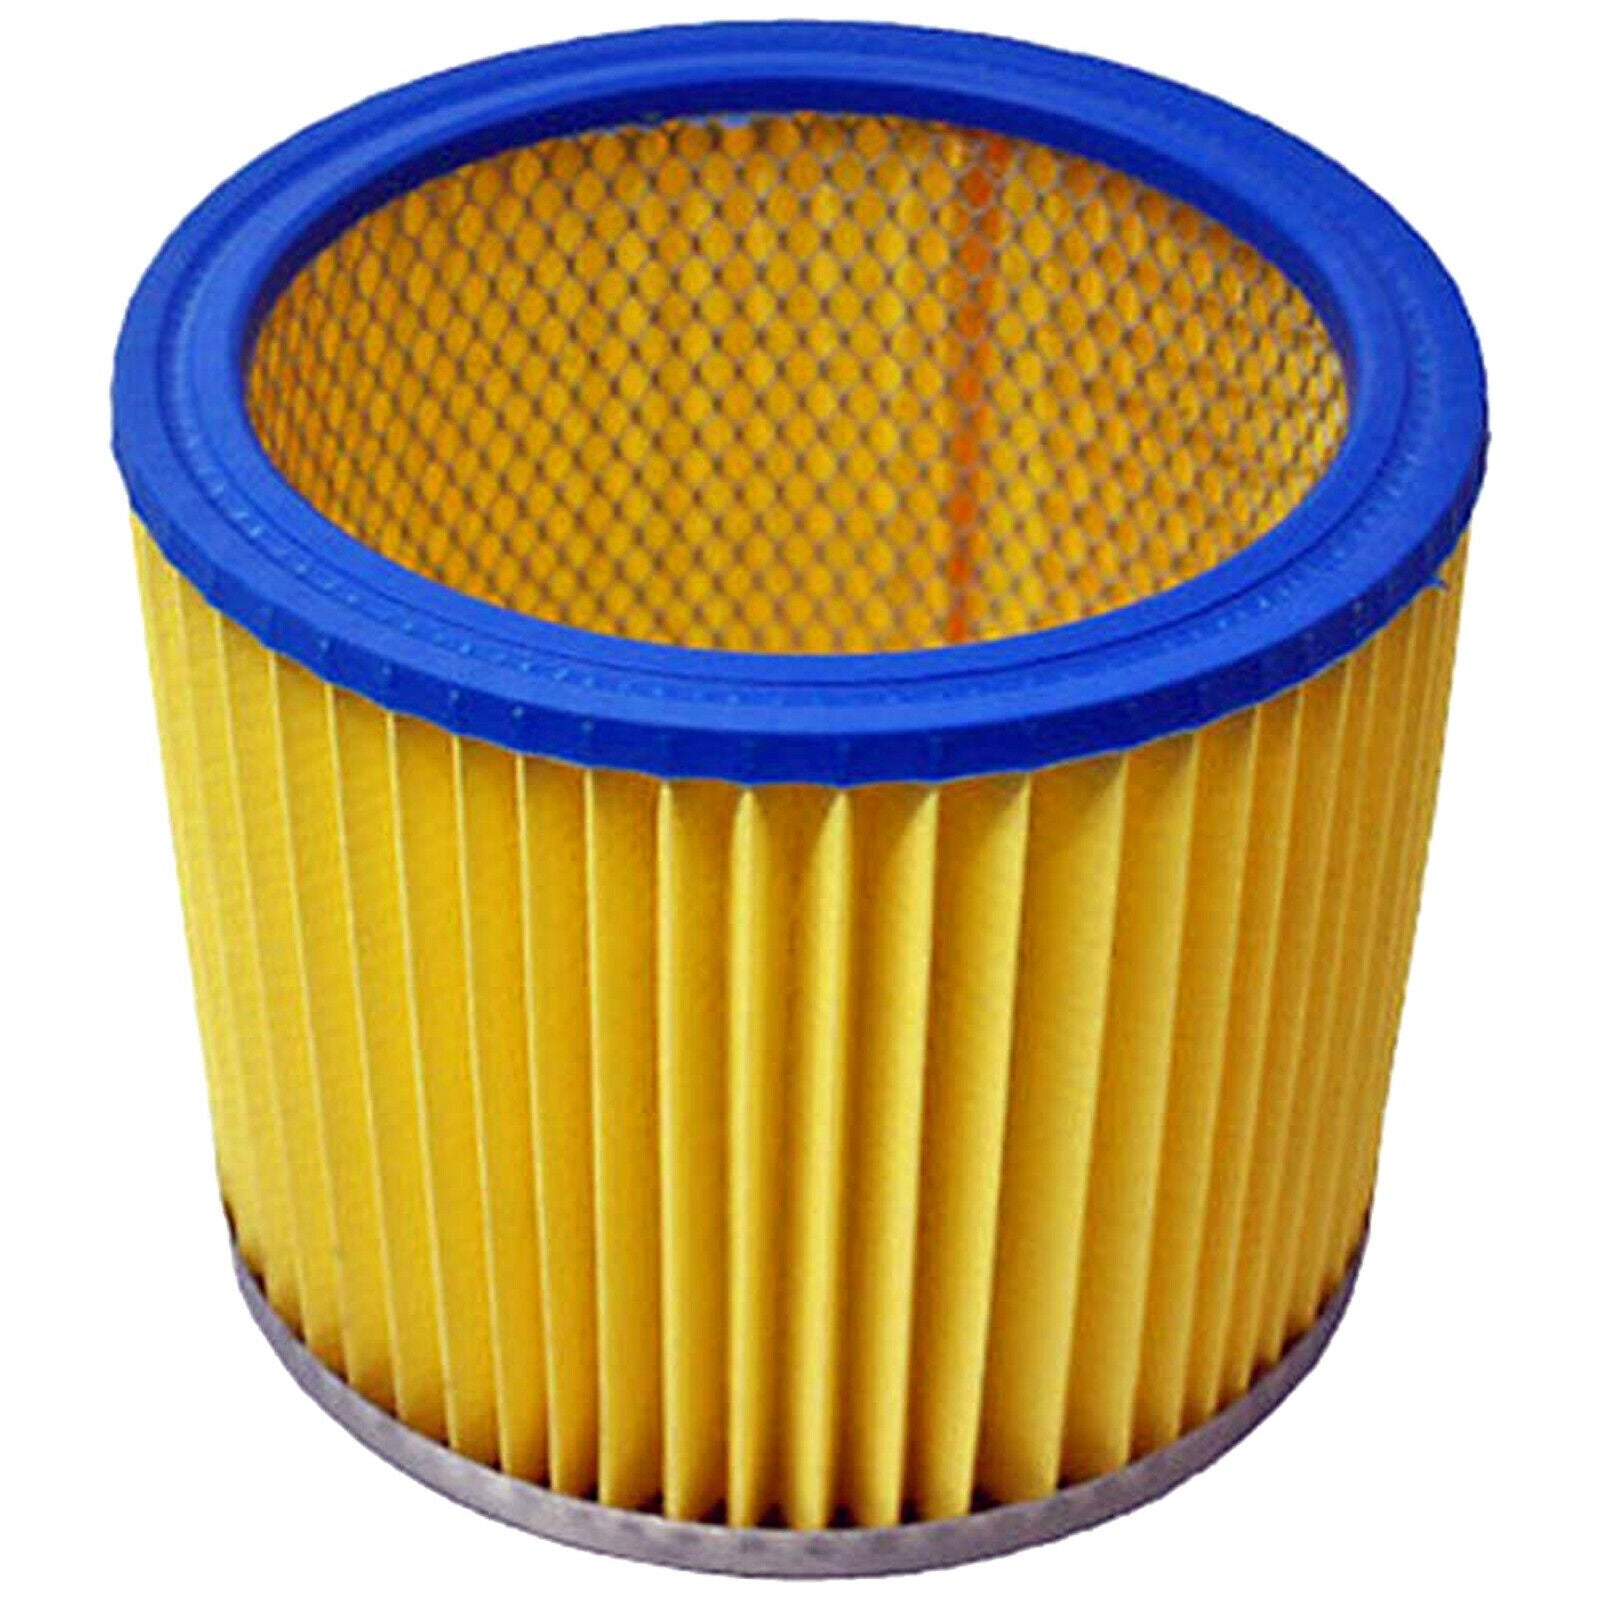 Filter Cartridge and Bags (40) compatible with EARLEX Combivac Vacuum Cleaners